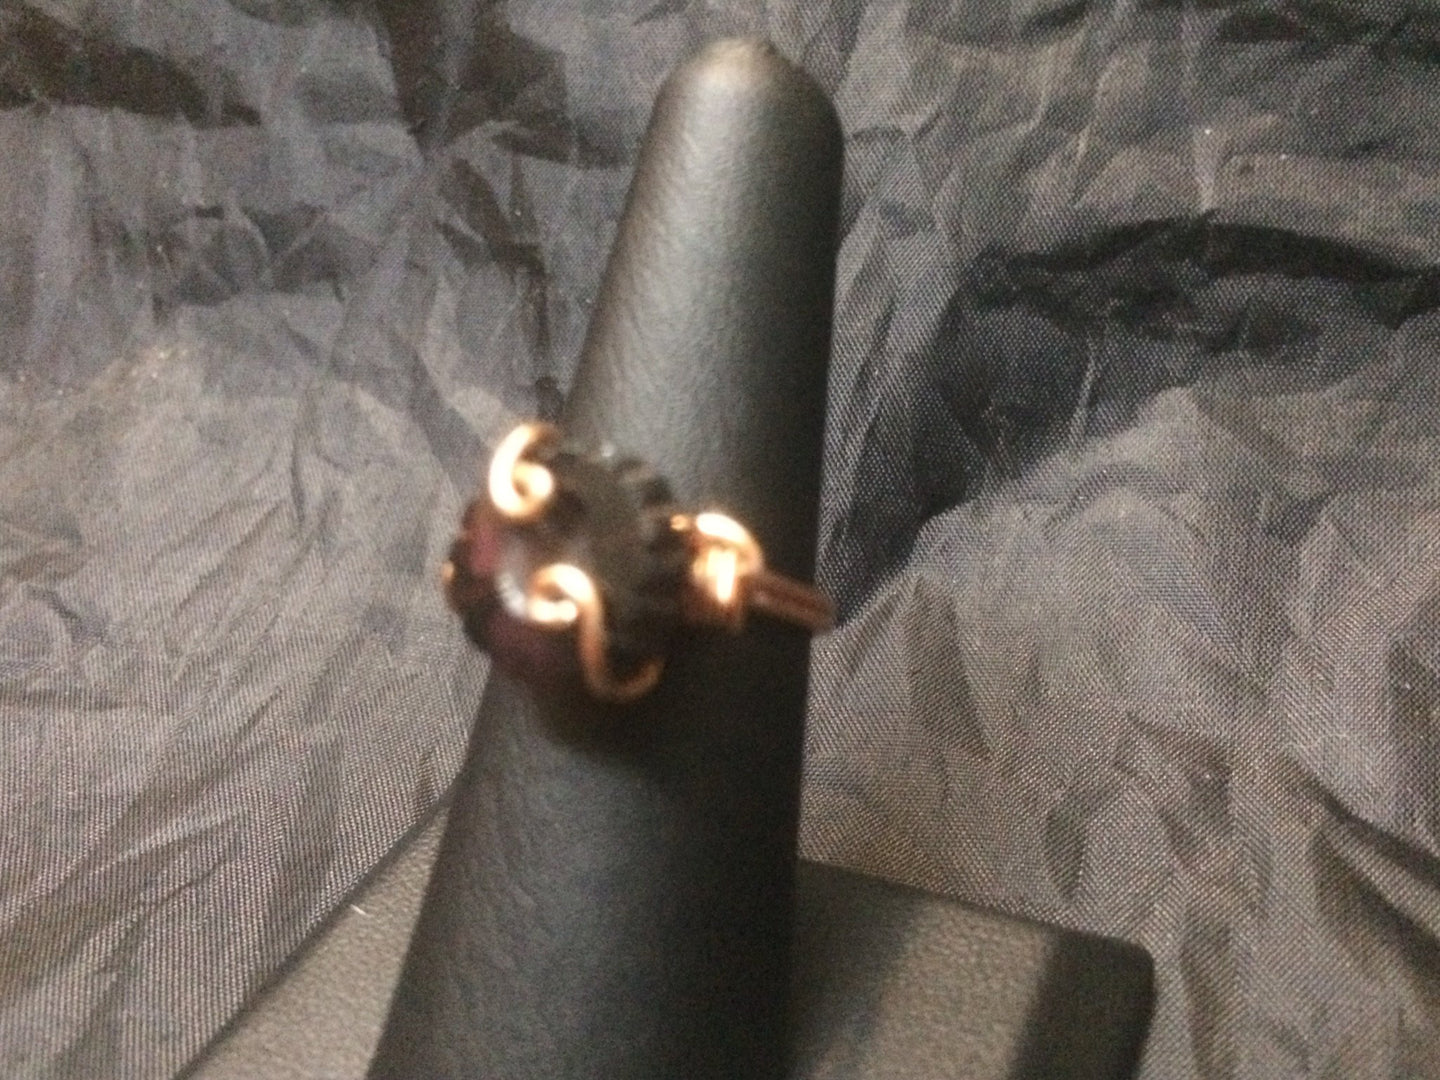 A deep garnet colored 12mm round Czech pressed glass bead  cut with a daisy pattern is set with swirls and coils in this copper wire wrapped ring. Rings made by this wire wrapping method vary individually. This one is approxmately a size 6.5.